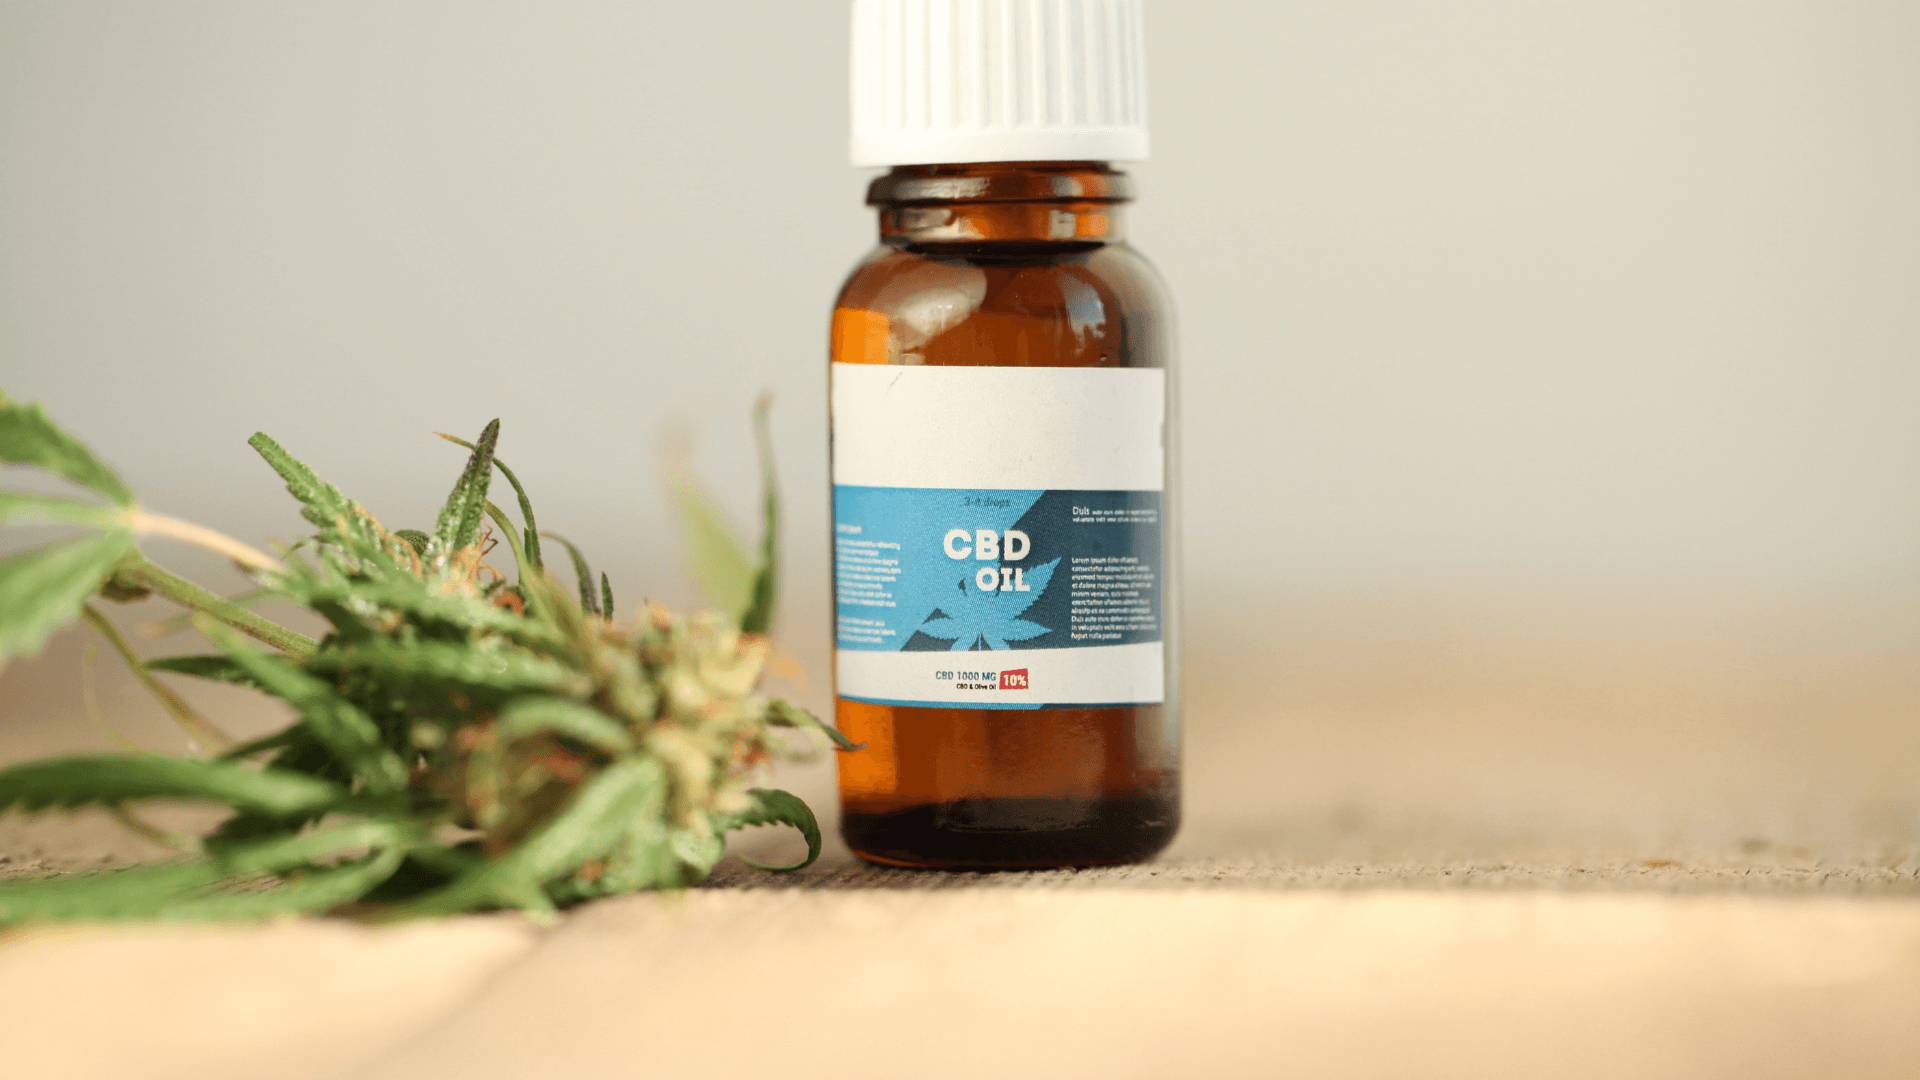 My Attempt at a Clear and Unbiased View of CBD for Treating Pain